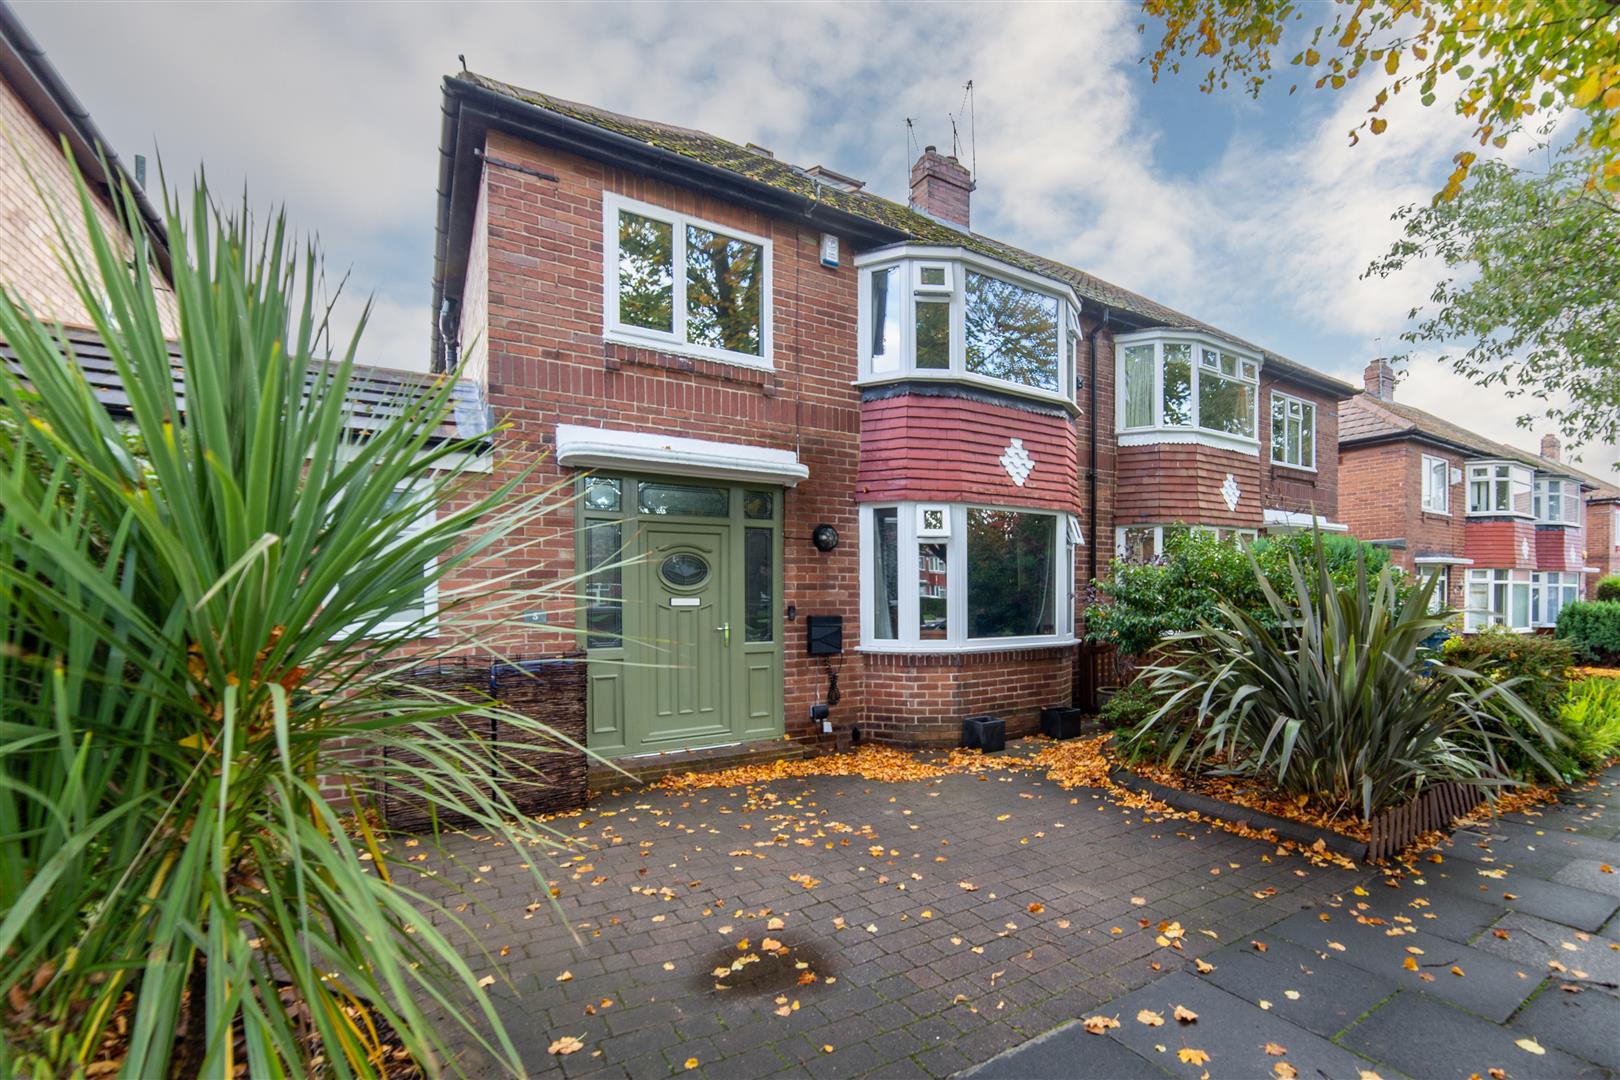 4 bed semi-detached house for sale in Berkeley Square, Gosforth, NE3 